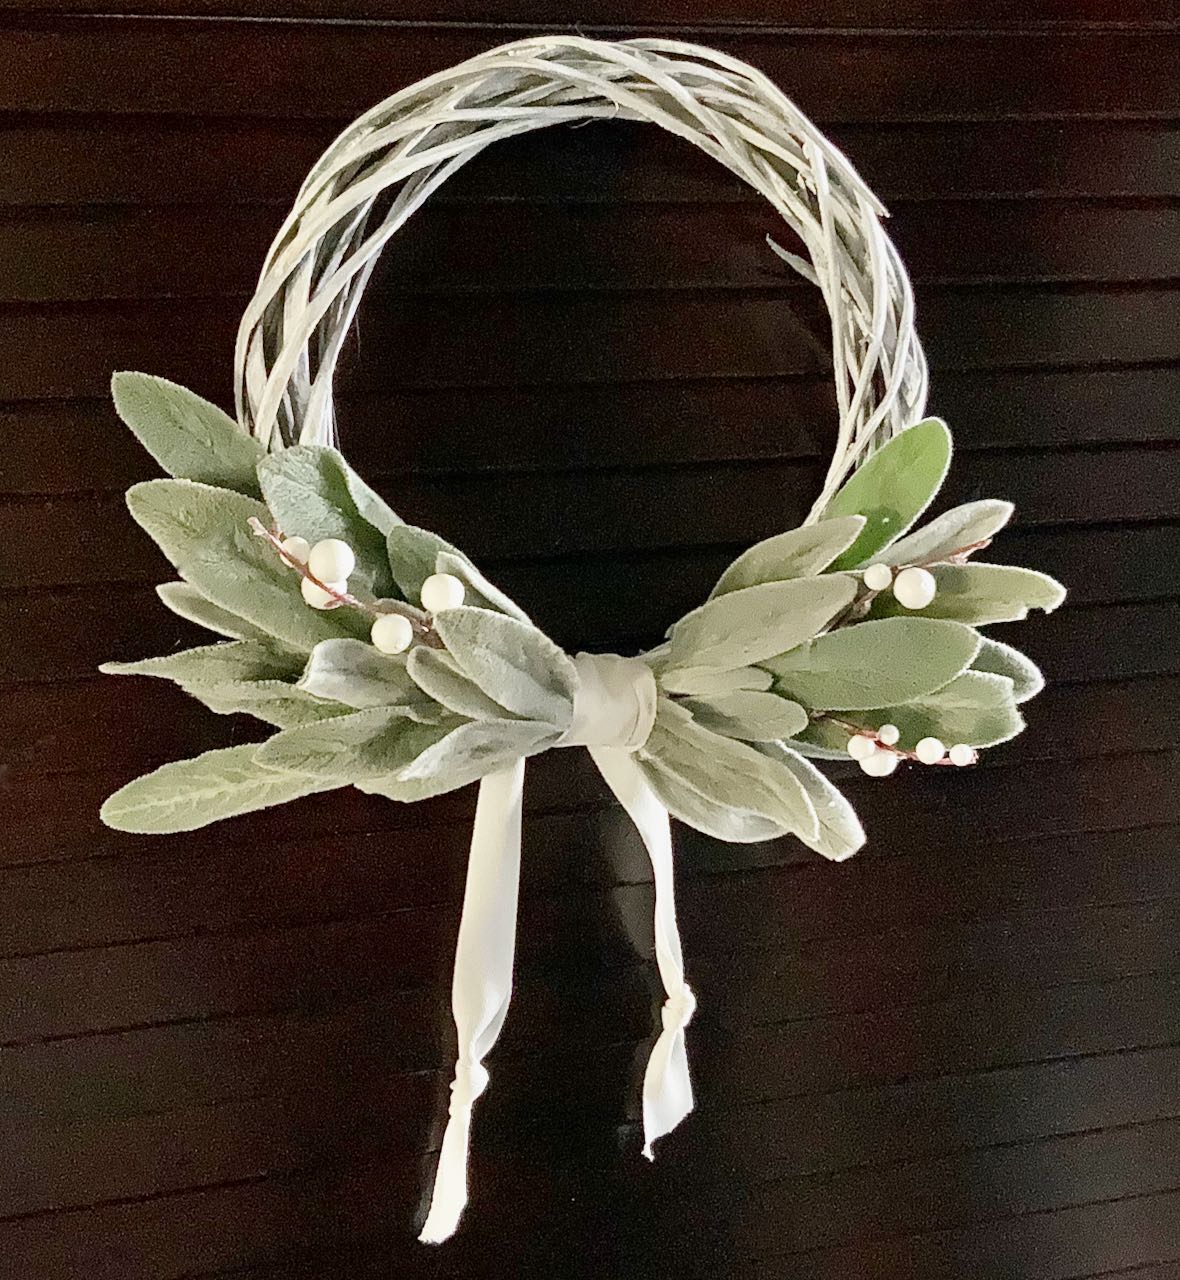 Wreath with lambs ear bundles facing out on the bottom of the wreath with a band of twill and the ends hanging down